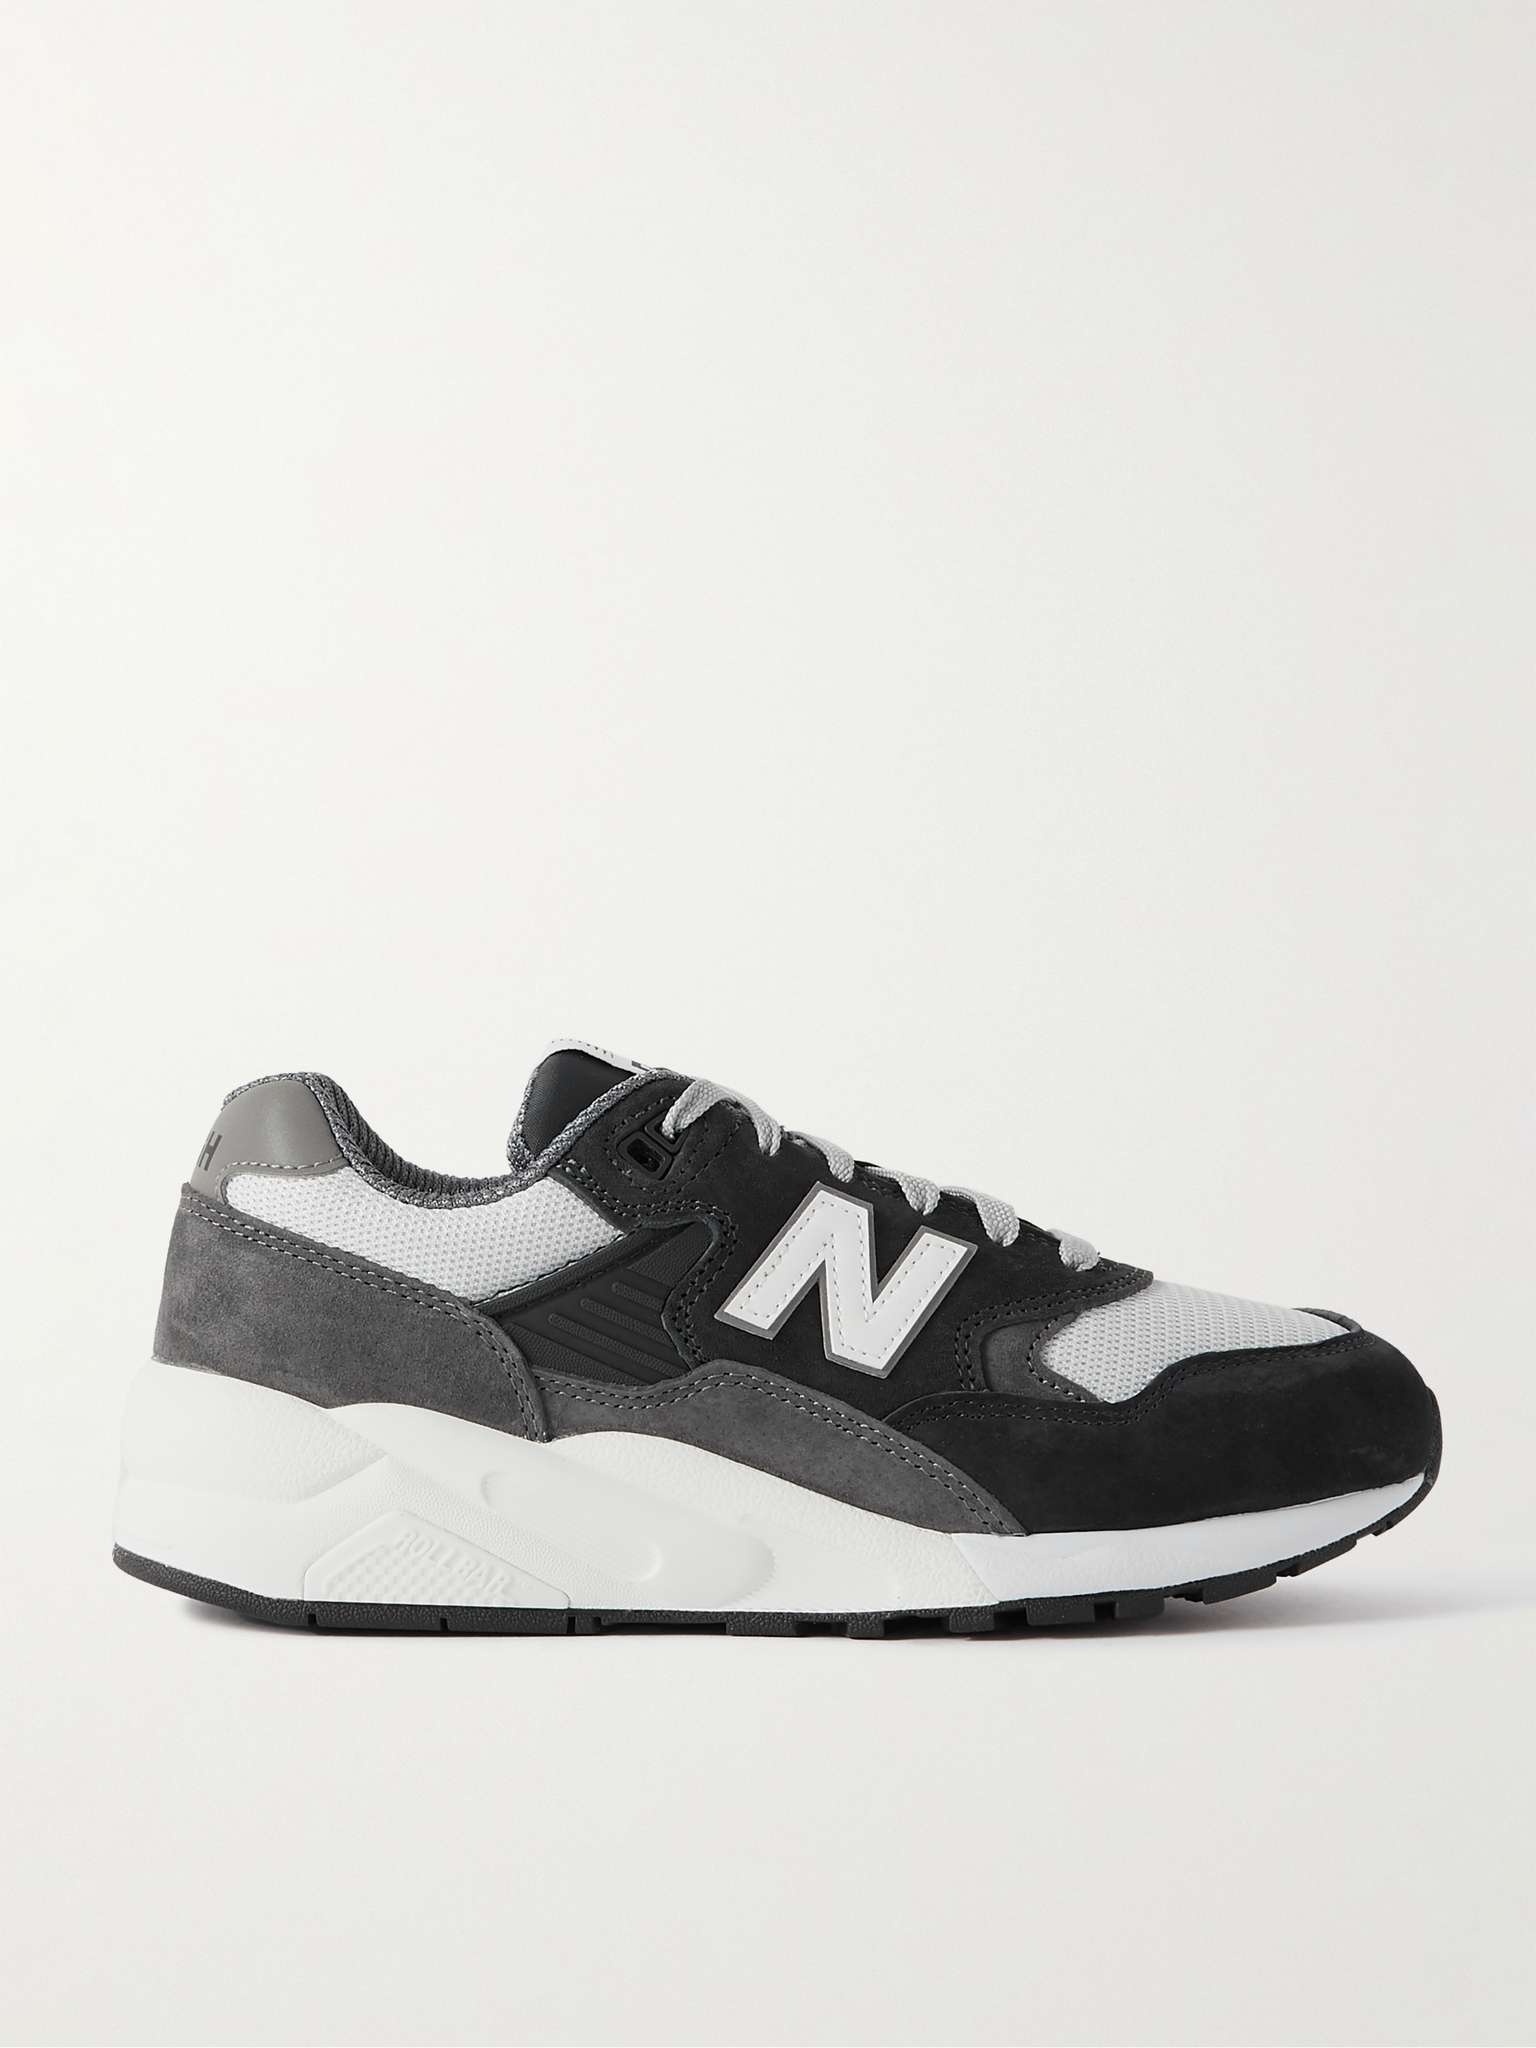 + New Balance 580 Suede and Mesh Sneakers - 1